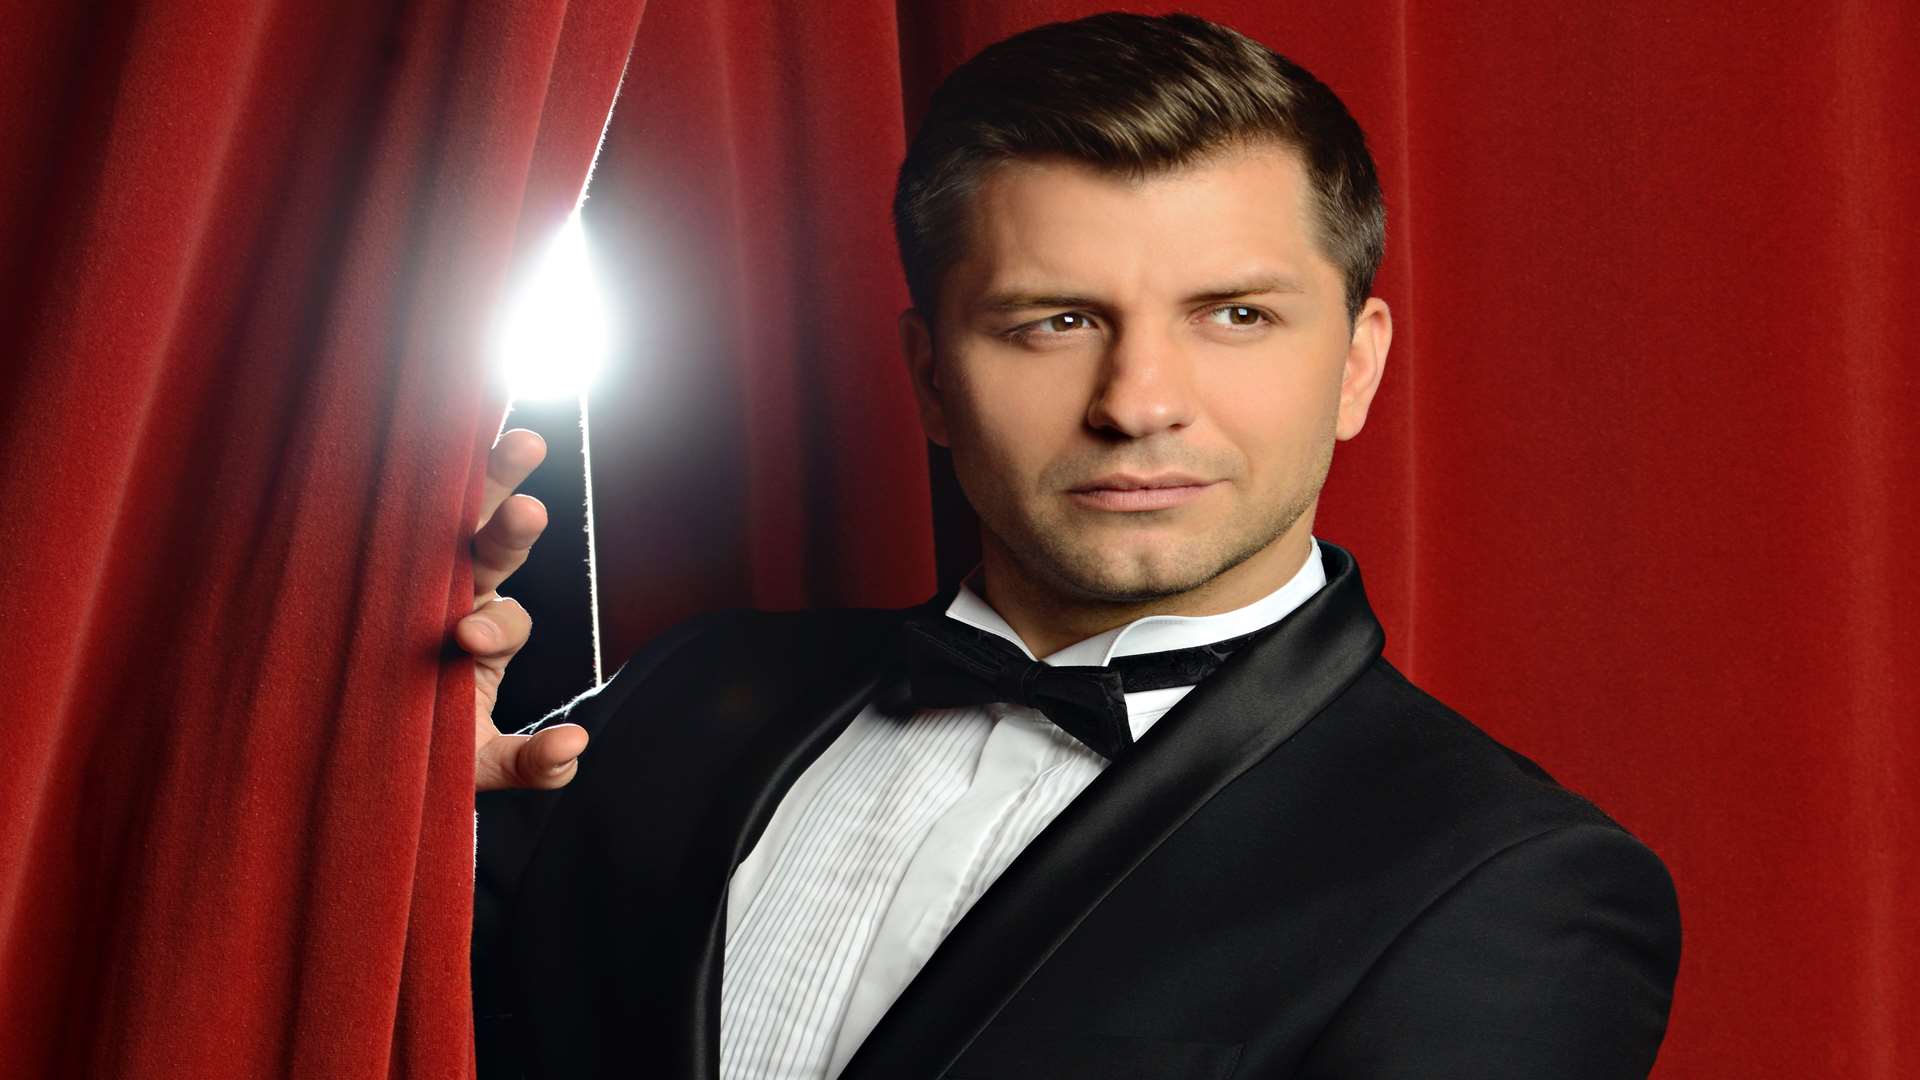 Pasha Kovalev brings his new tour Let's Dance the Night Away to Folkestone and Dartford